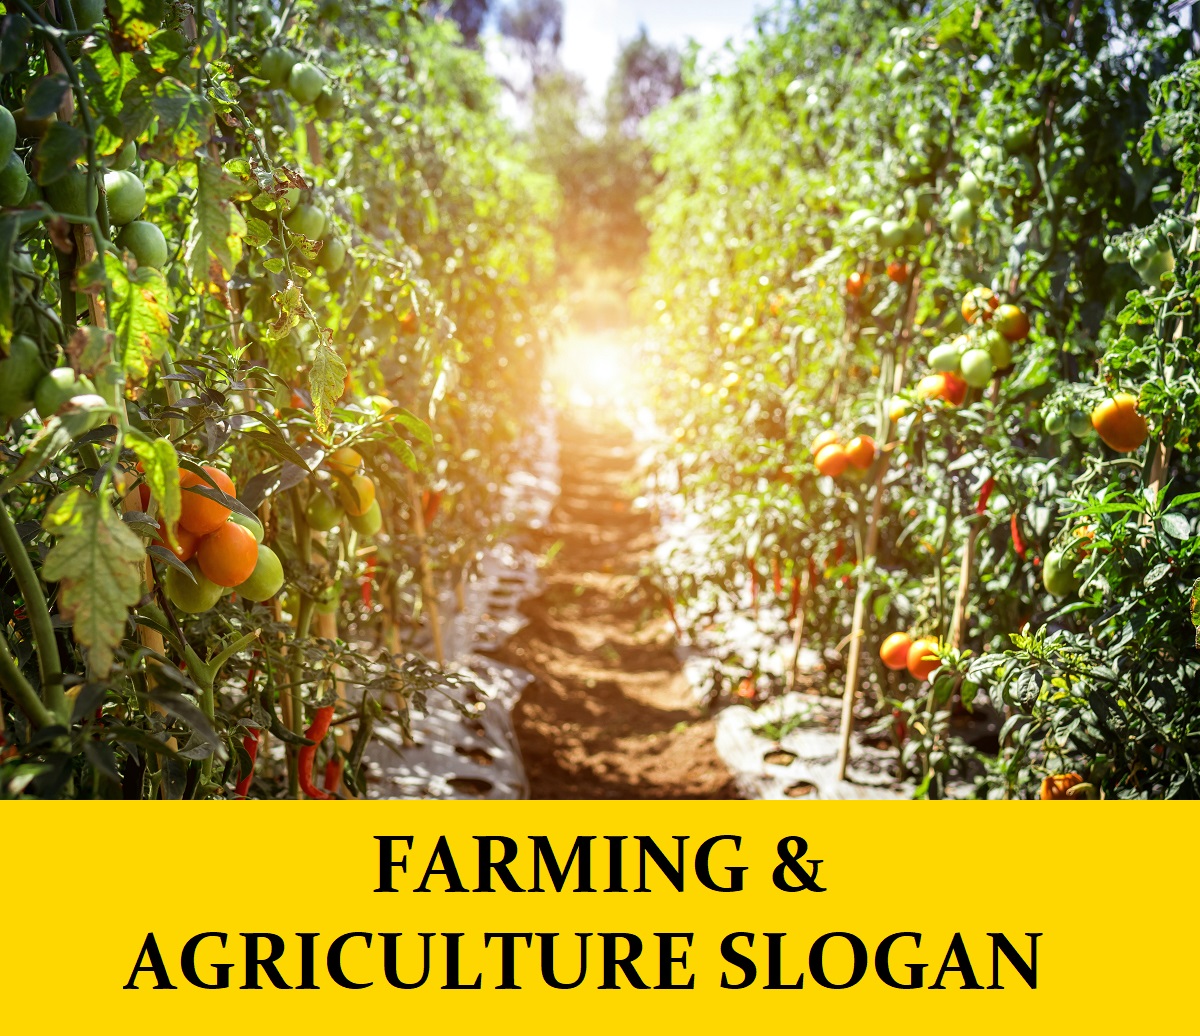 Slogans for Farming & Agriculture